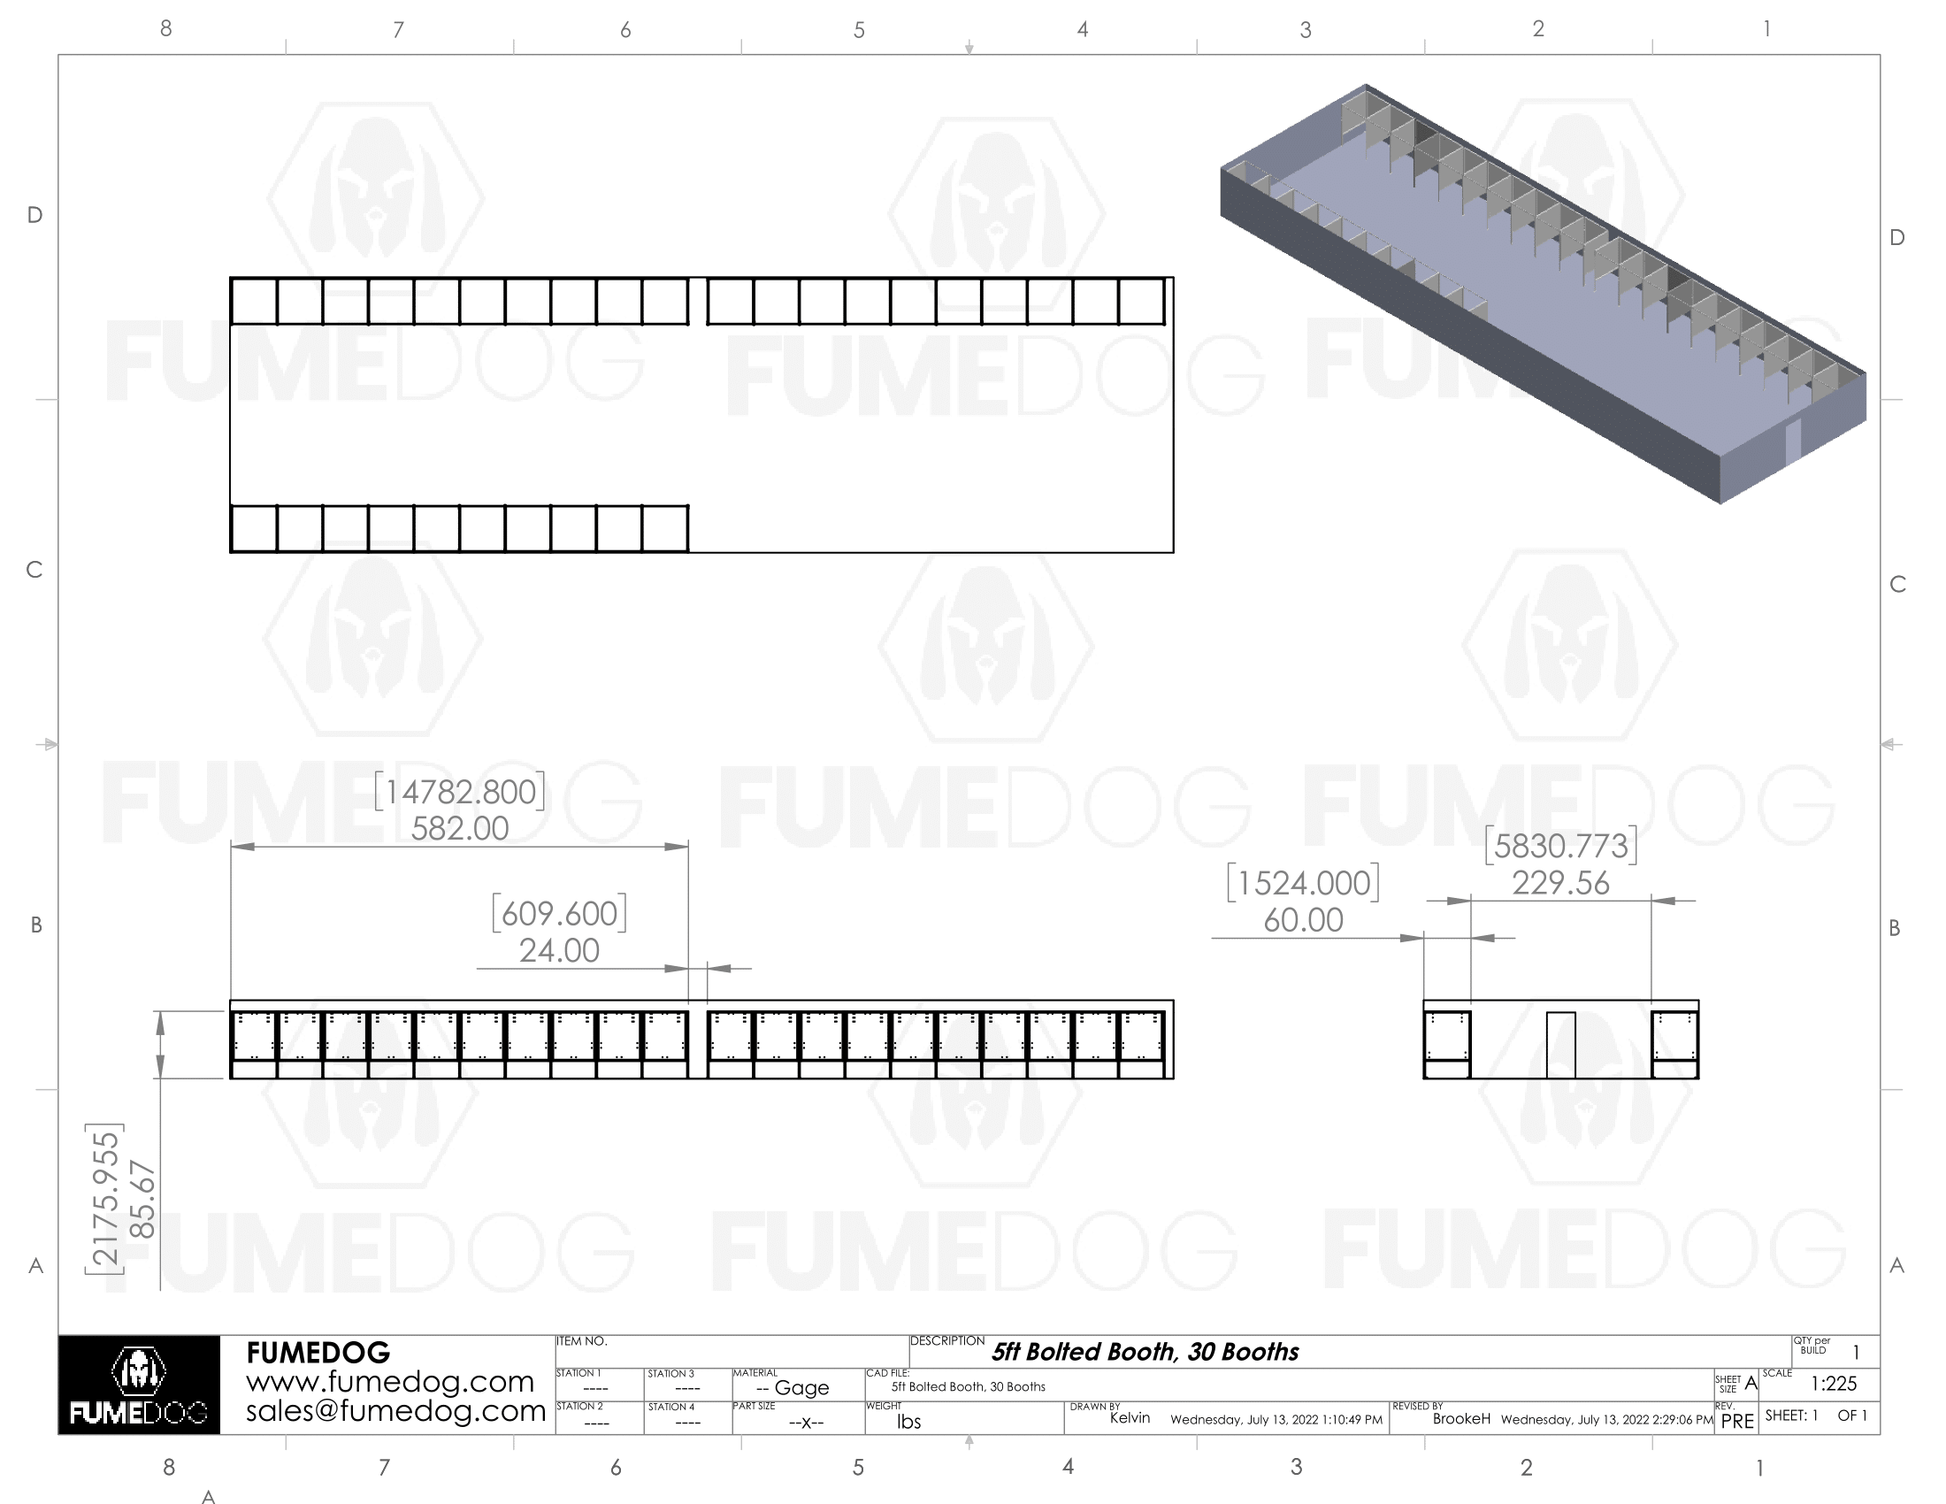 Fume Dog - 30 Welding Booth Package Image Dimensions